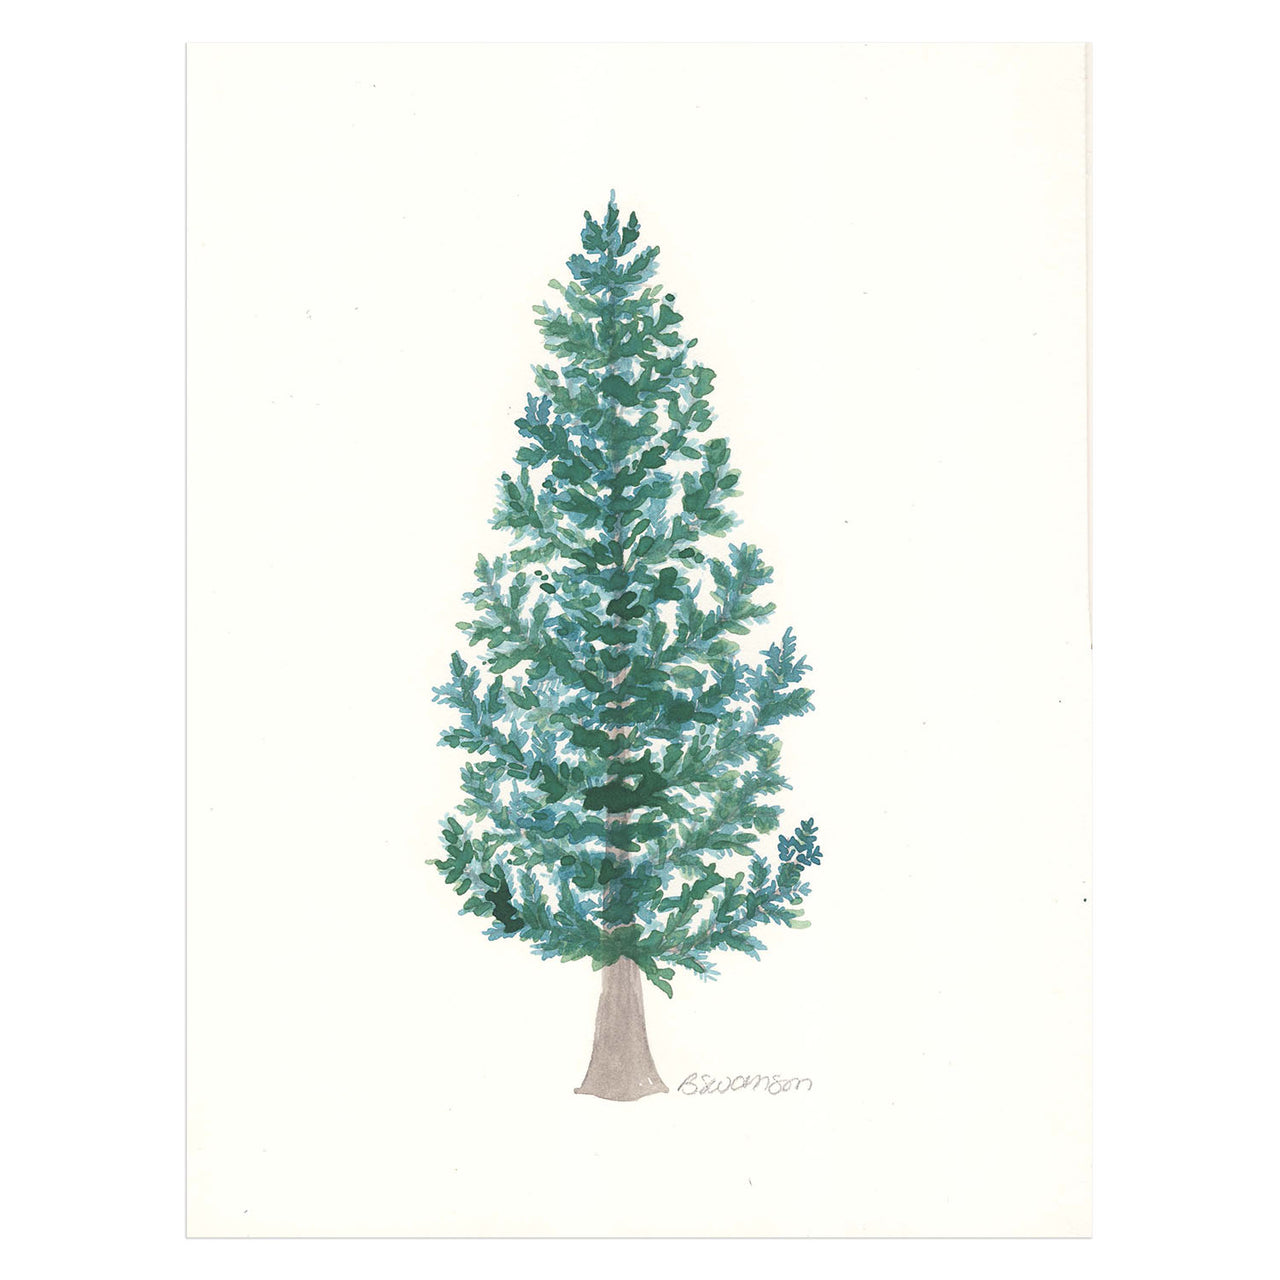 original watercolor painting of a sitka spruce tree